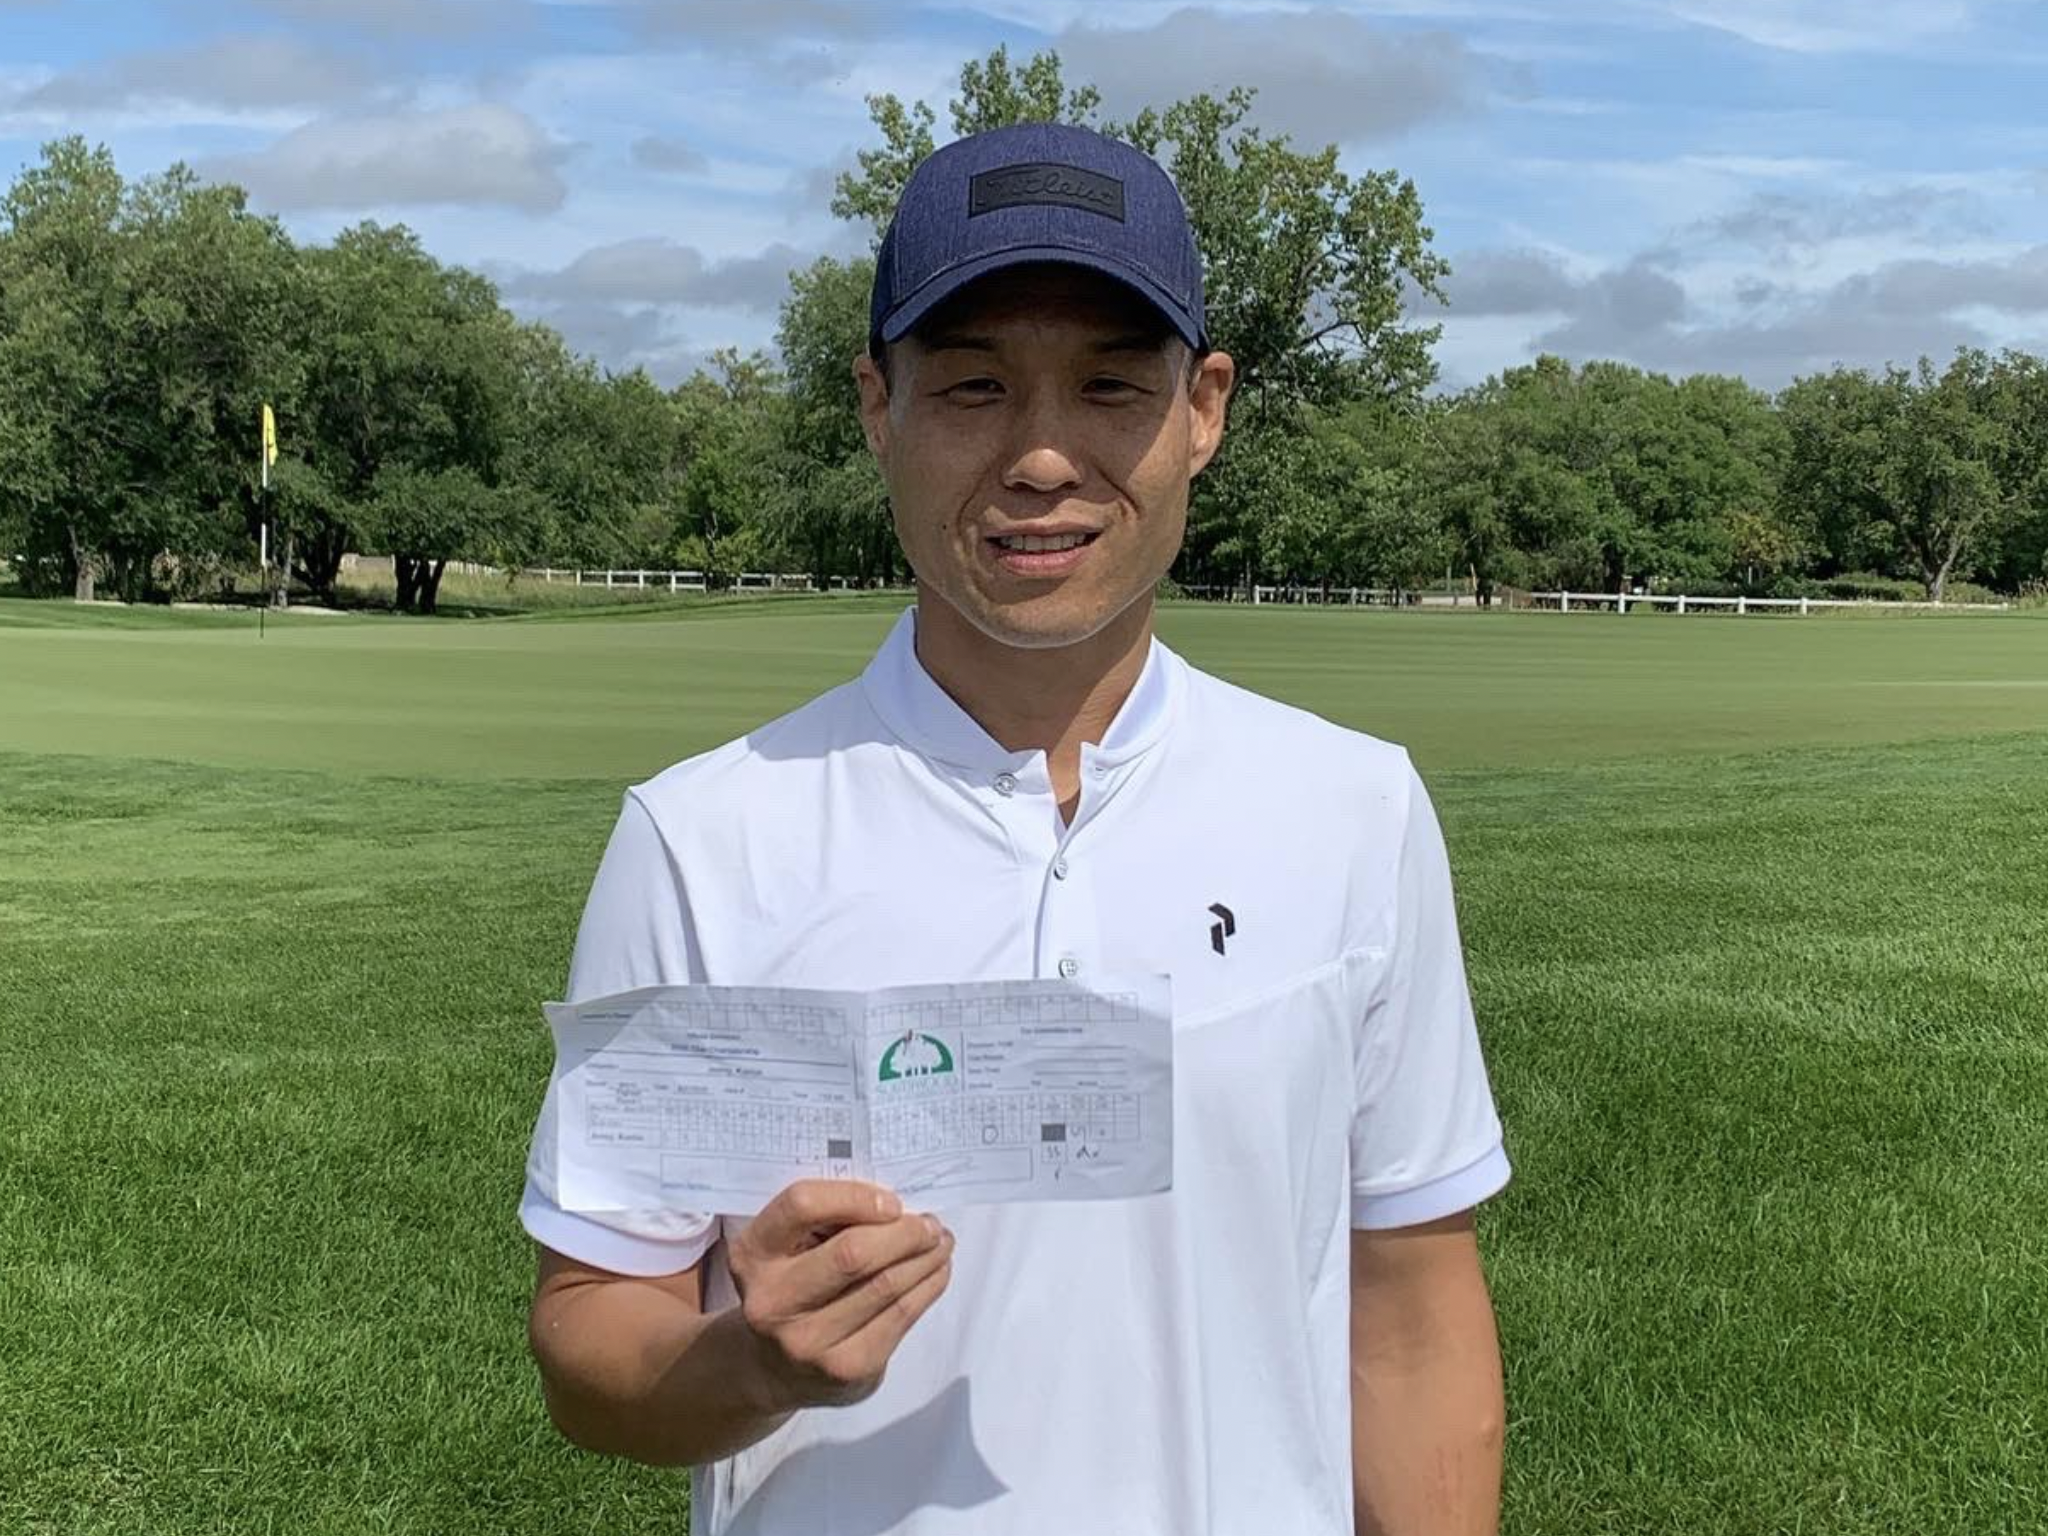 Golfer posts arguably the coolest scorecard of the year during club championship